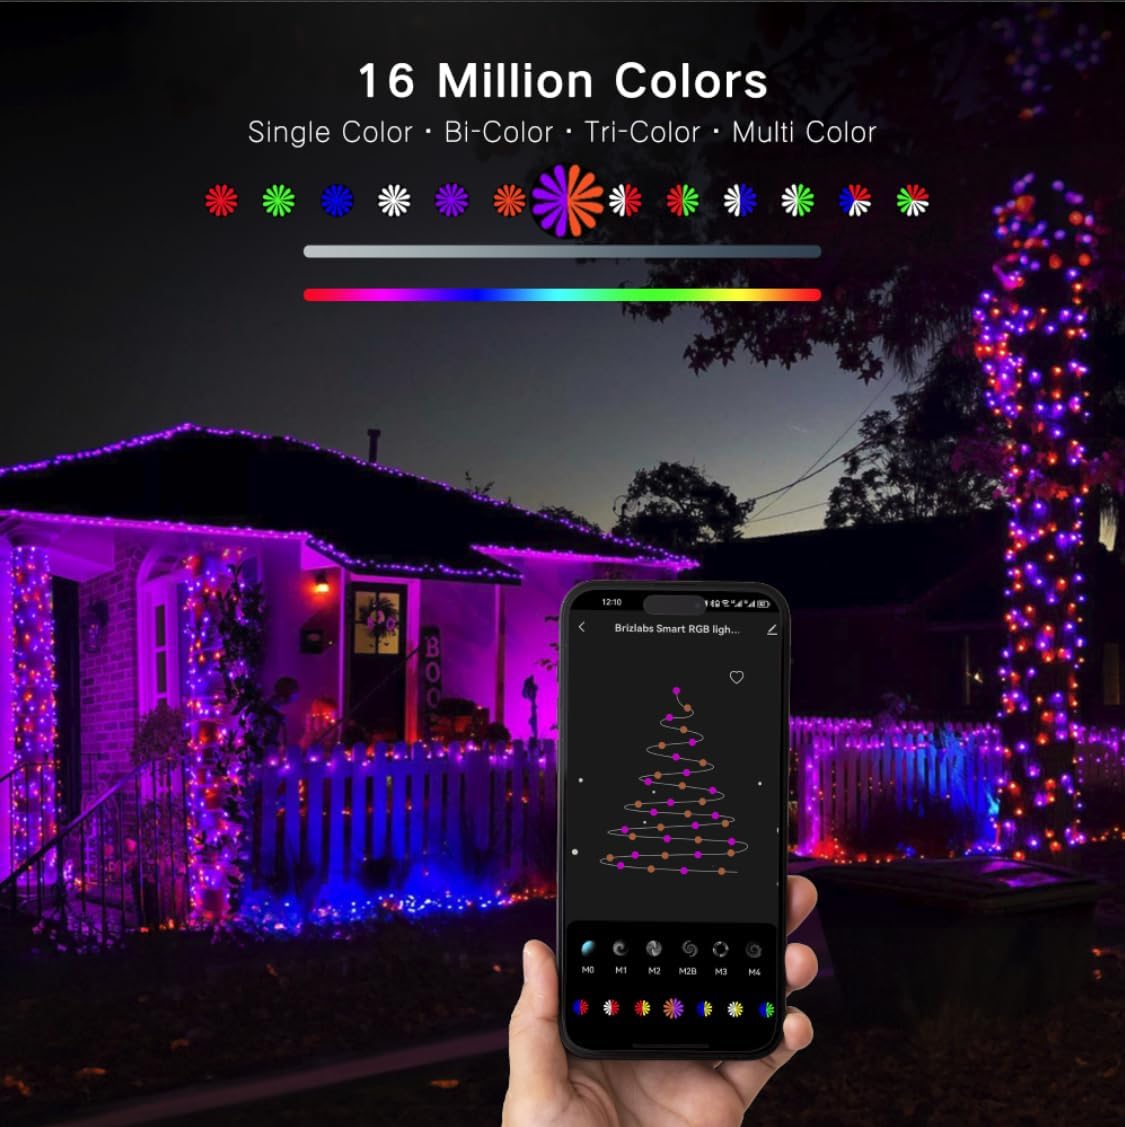 BrizLabs Smart String Lights 261ft 798 LED App Control Work with Alexa Google Home PREMIUM SERIES